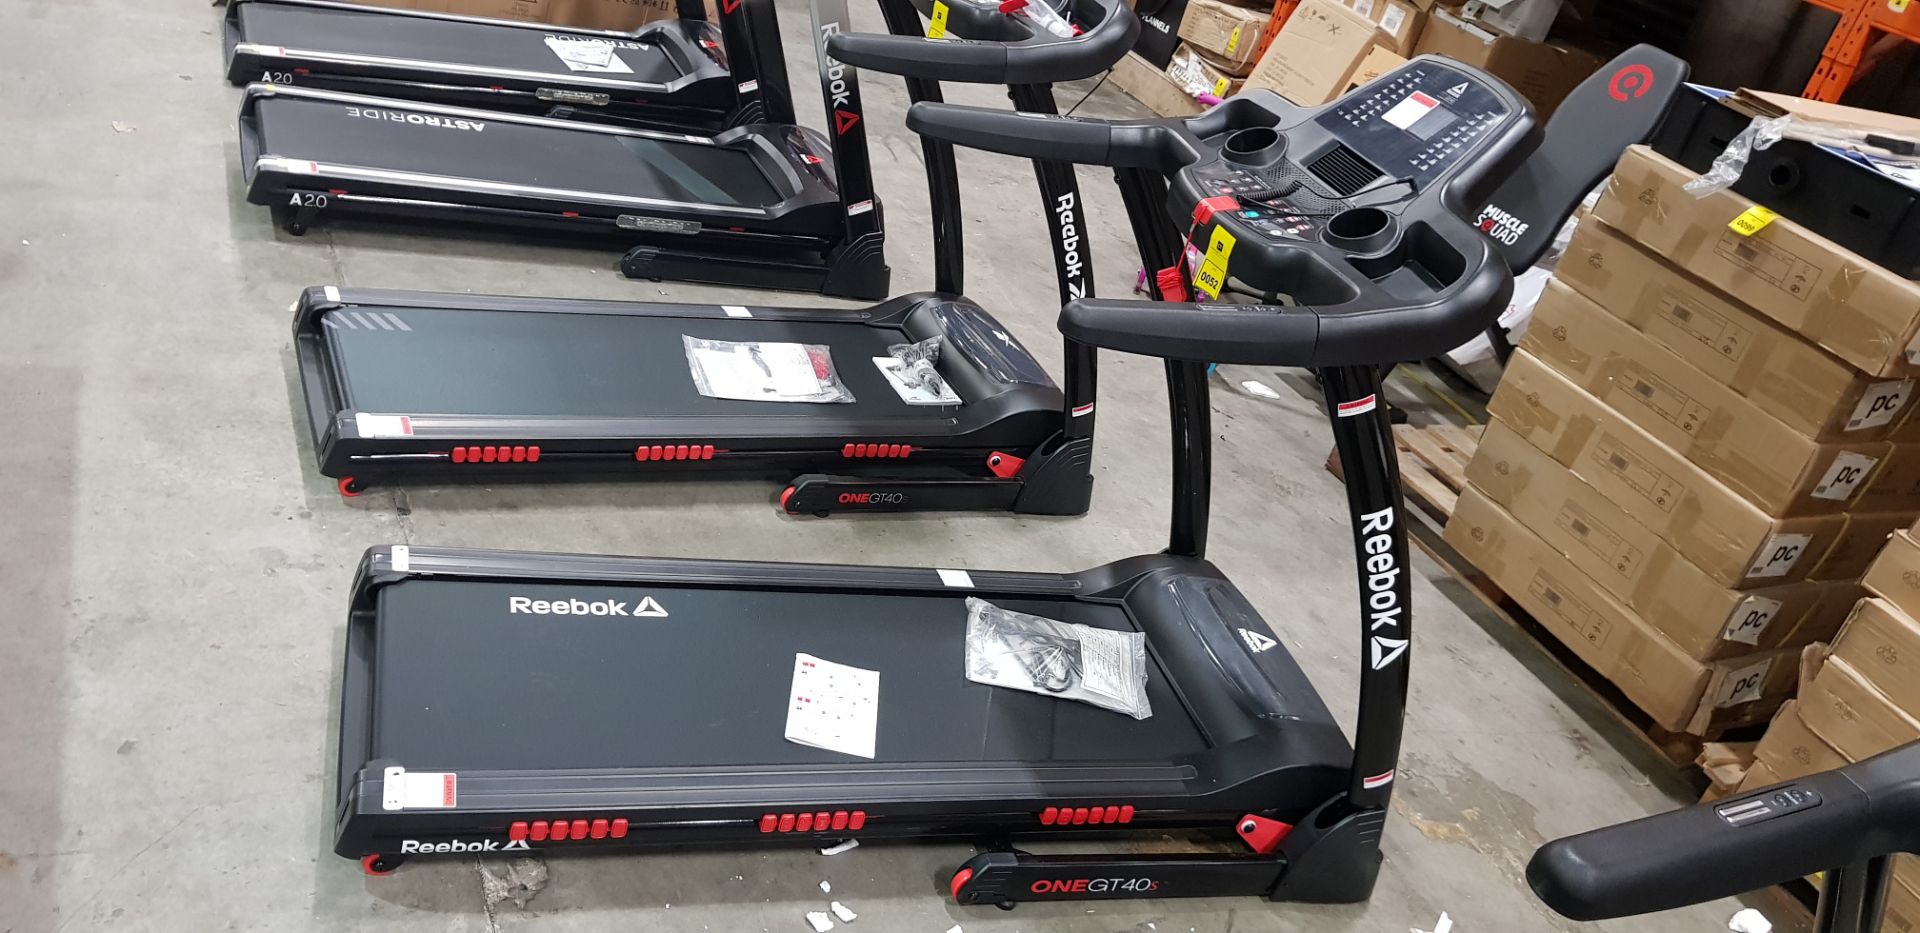 1 X REEBOK ONE GT40S TREADMILL - INCLUDES ATTACHMENTS AND LUBE OIL ( FULLY WORKING - TESTED ) - 36